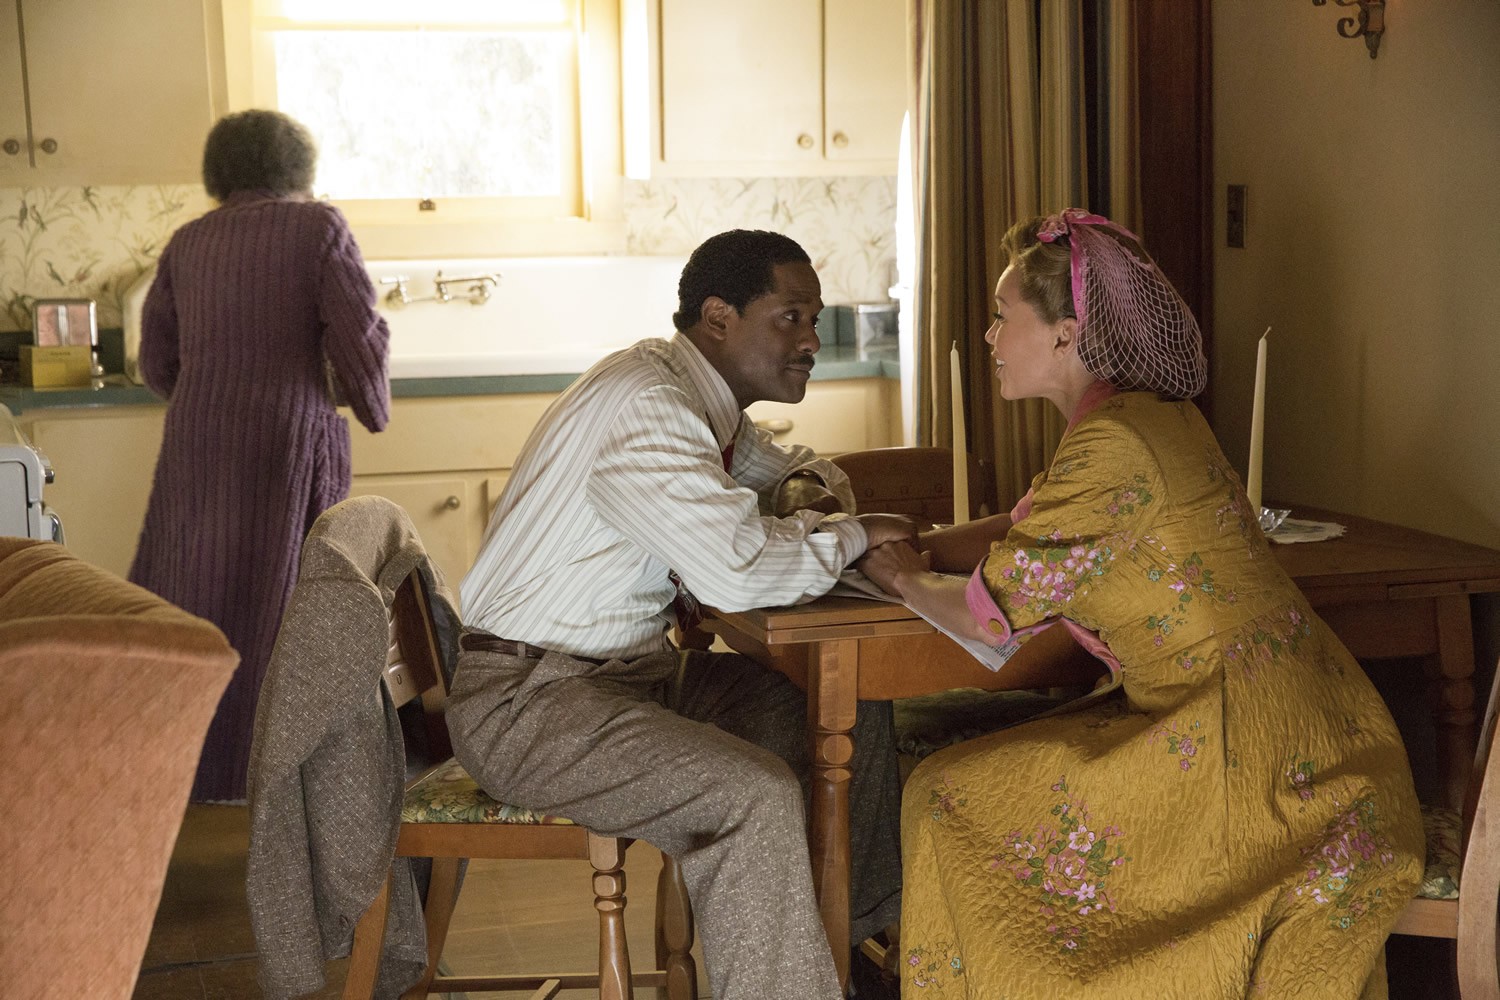 Cicely Tyson, Blair Underwood and Vanessa Williams in Lifetime's The Trip to Bountiful (2014). Photo credit by Bob Mahoney.